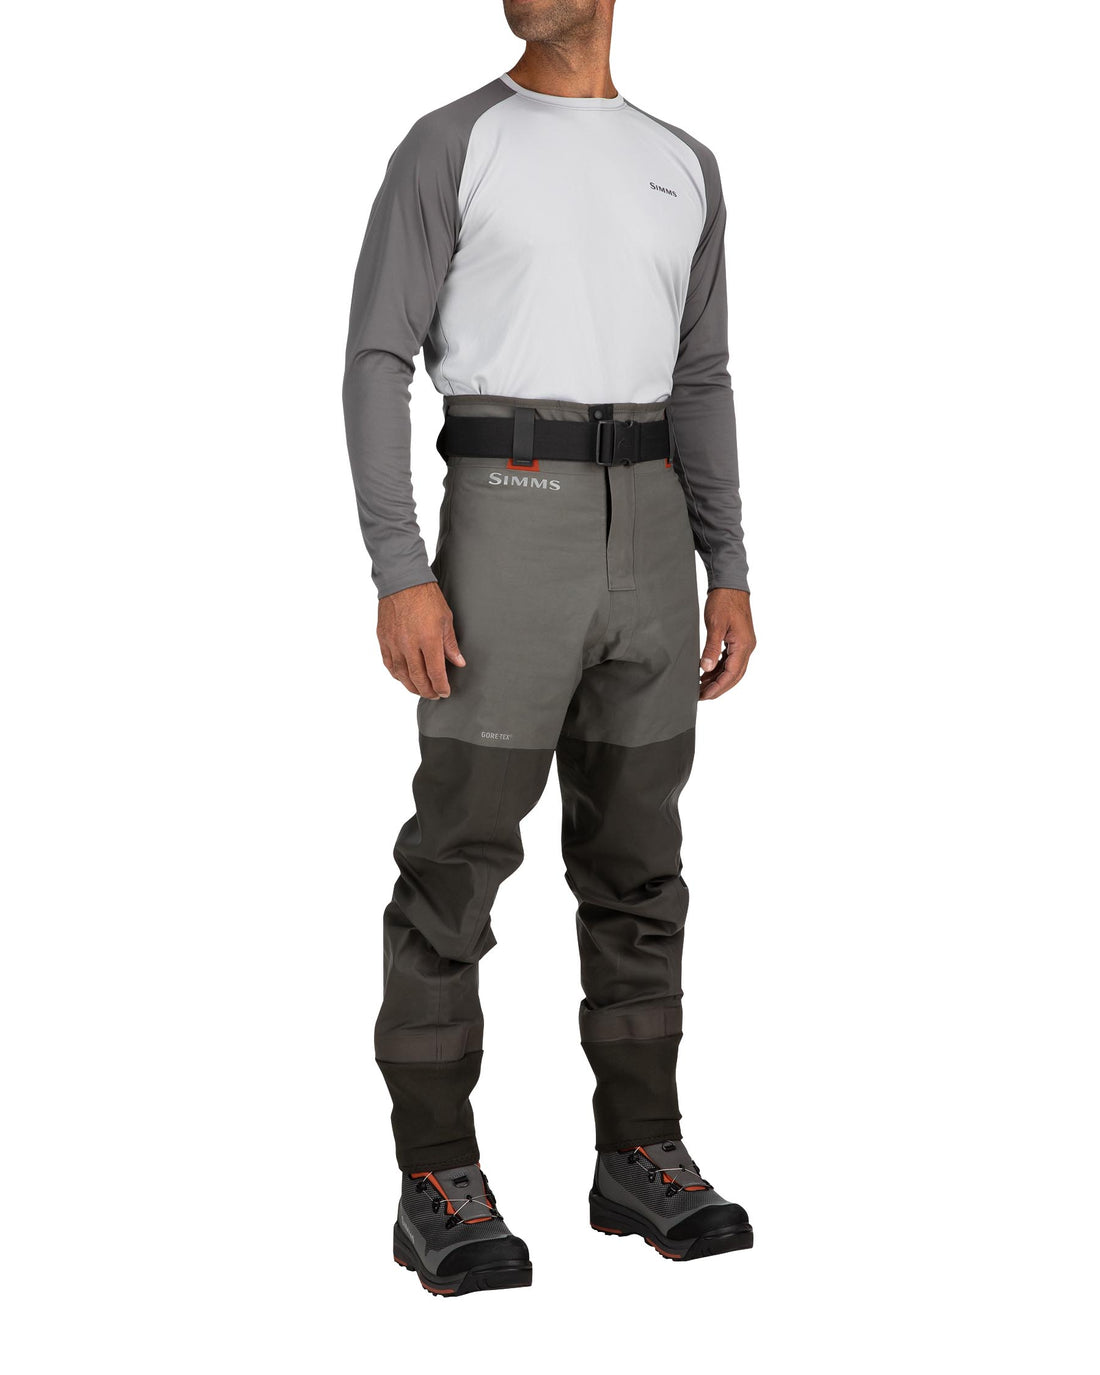 G3 Guide Pant - ( SIMMS) - Blue Quill Angler